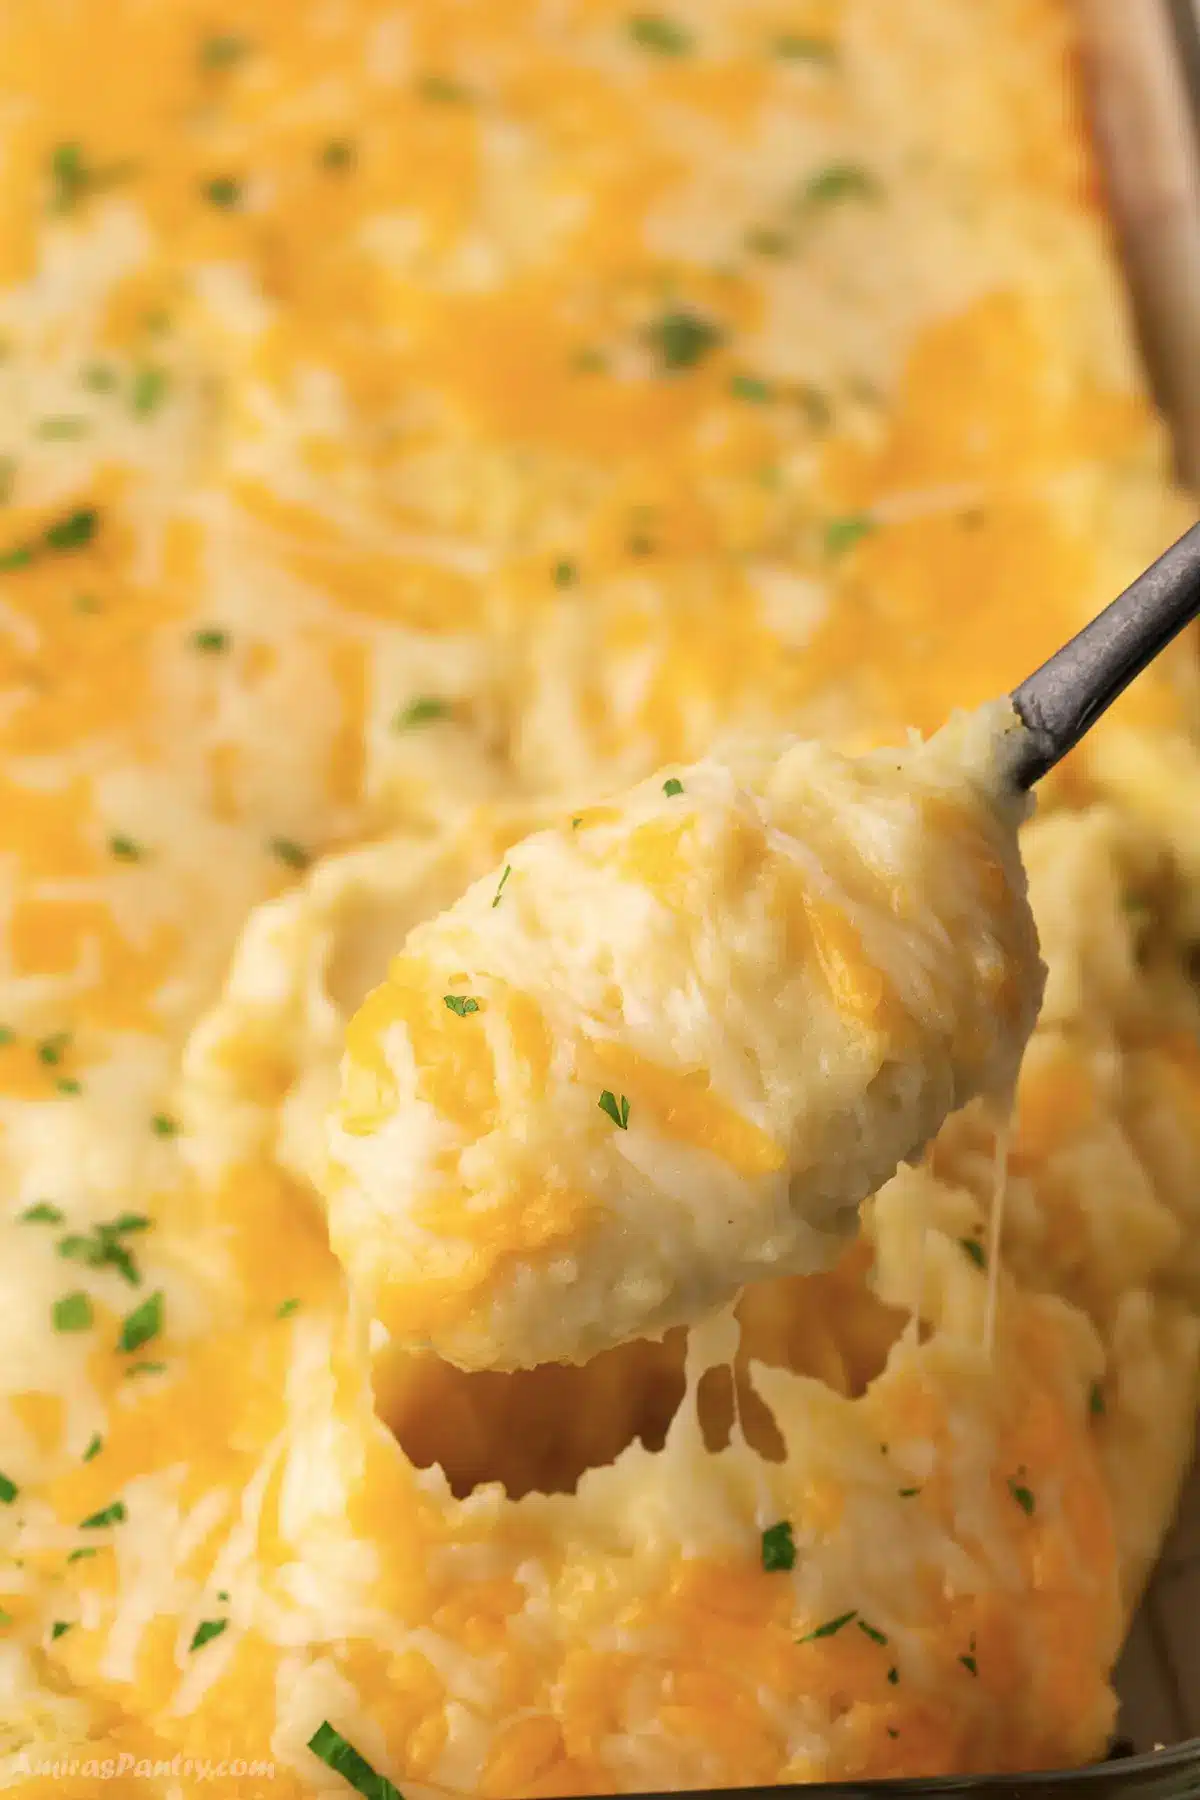 A spoon scooping some cheesy mashed potatoes out of a casserole dish.